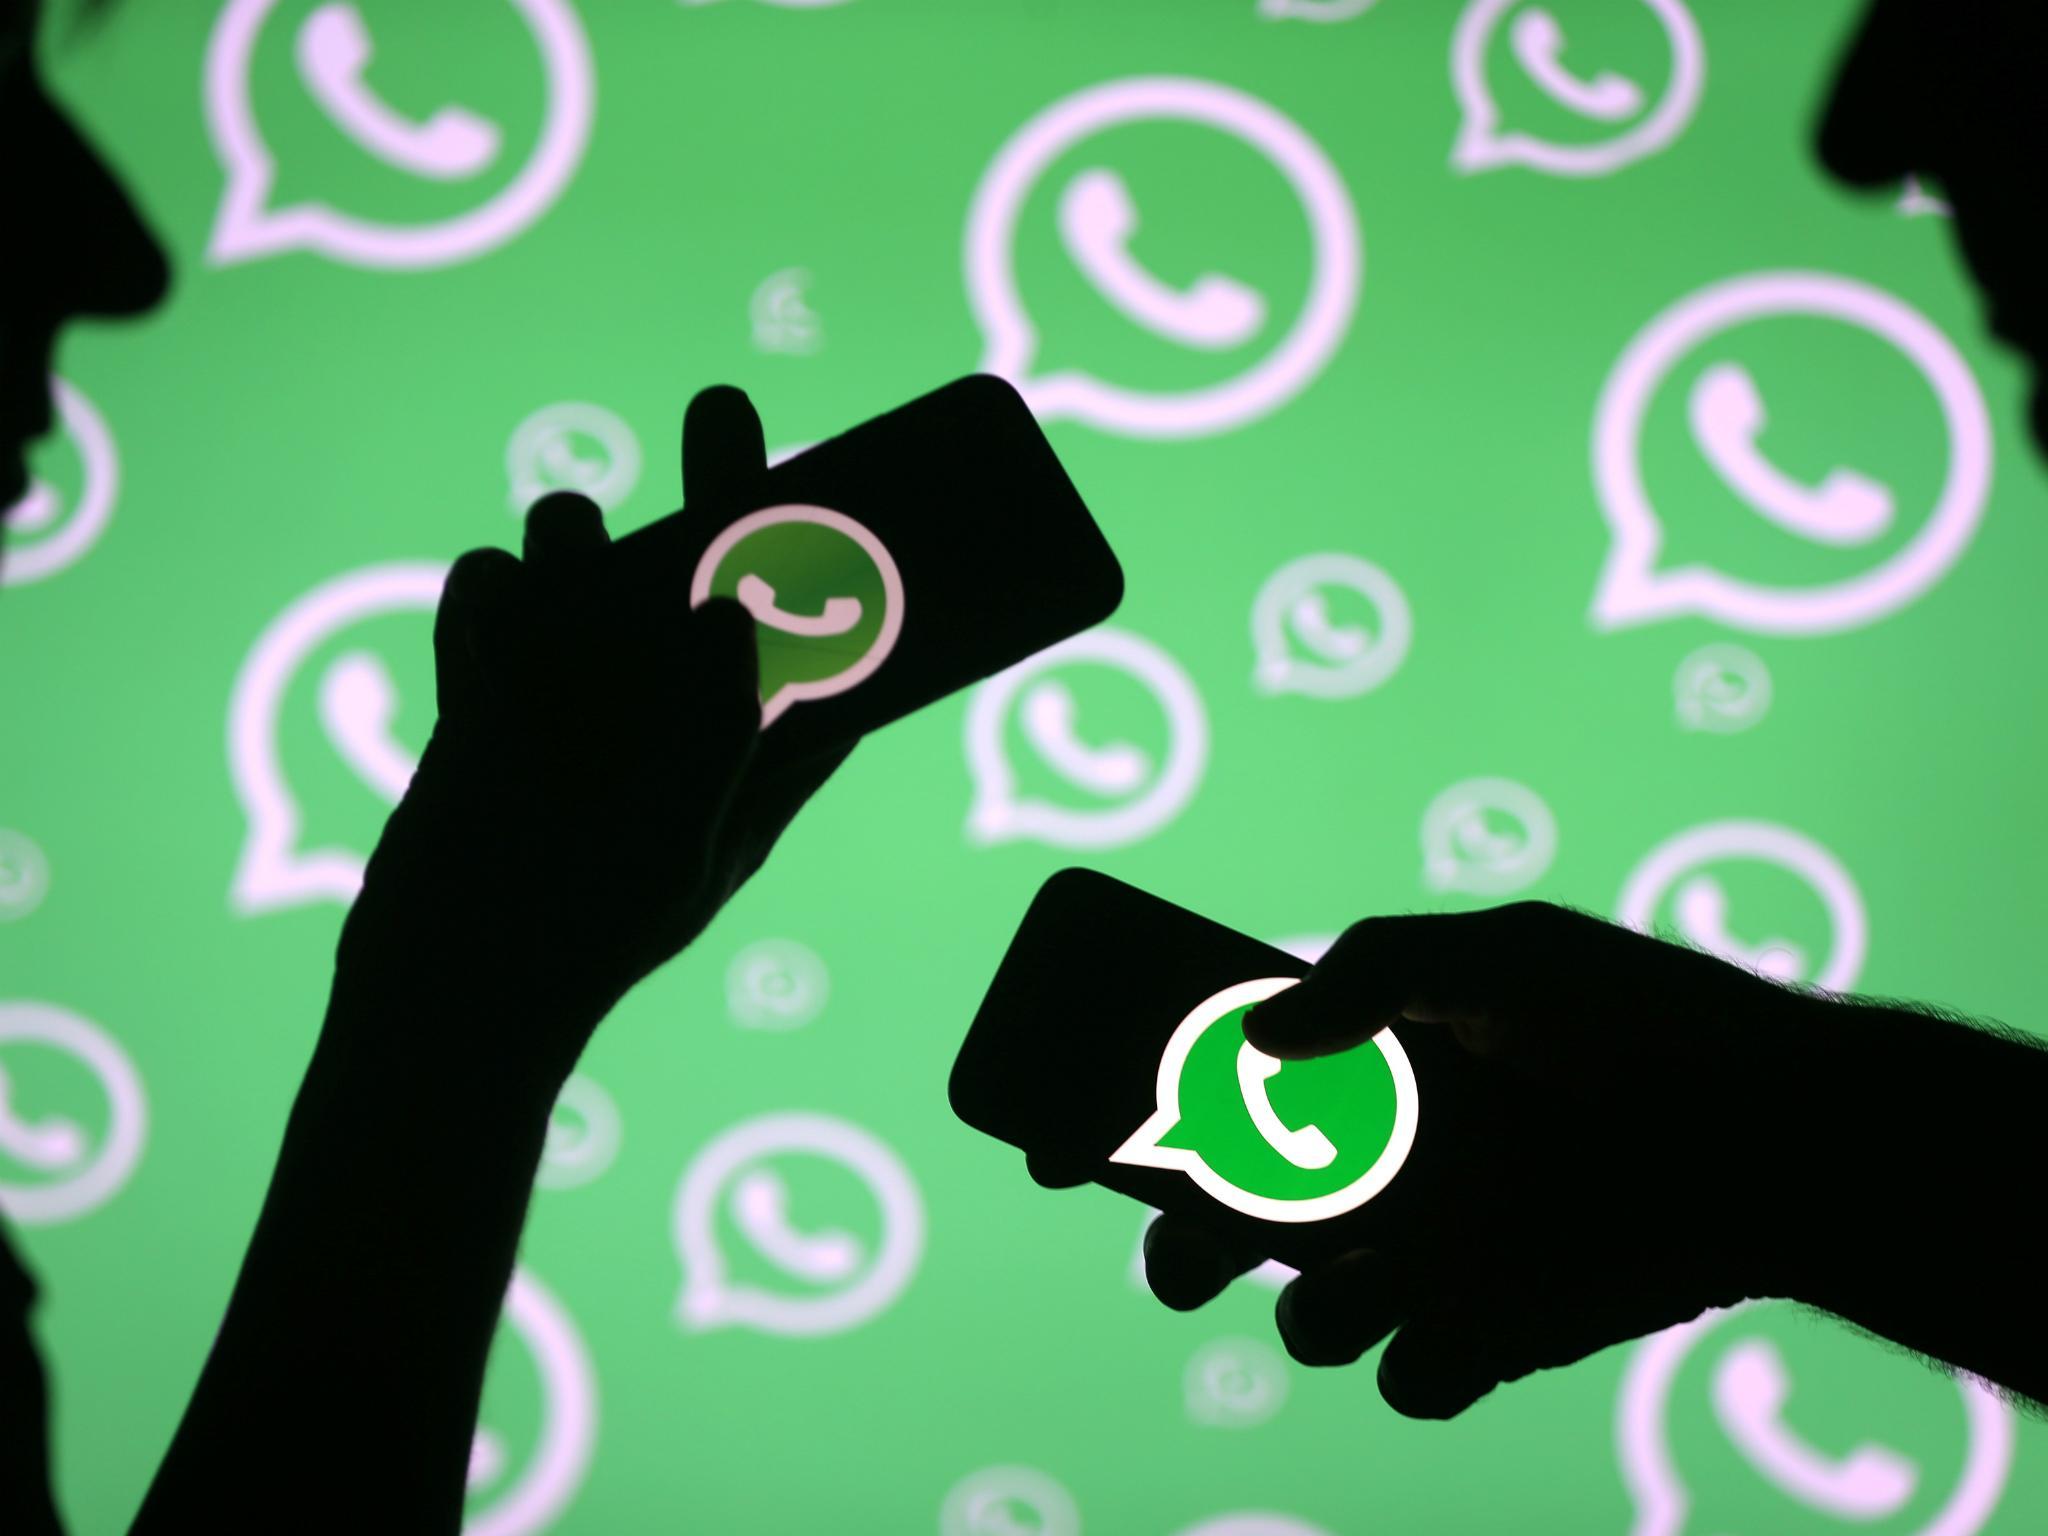 A new option being tested to allow users download all the data from WhatsApp